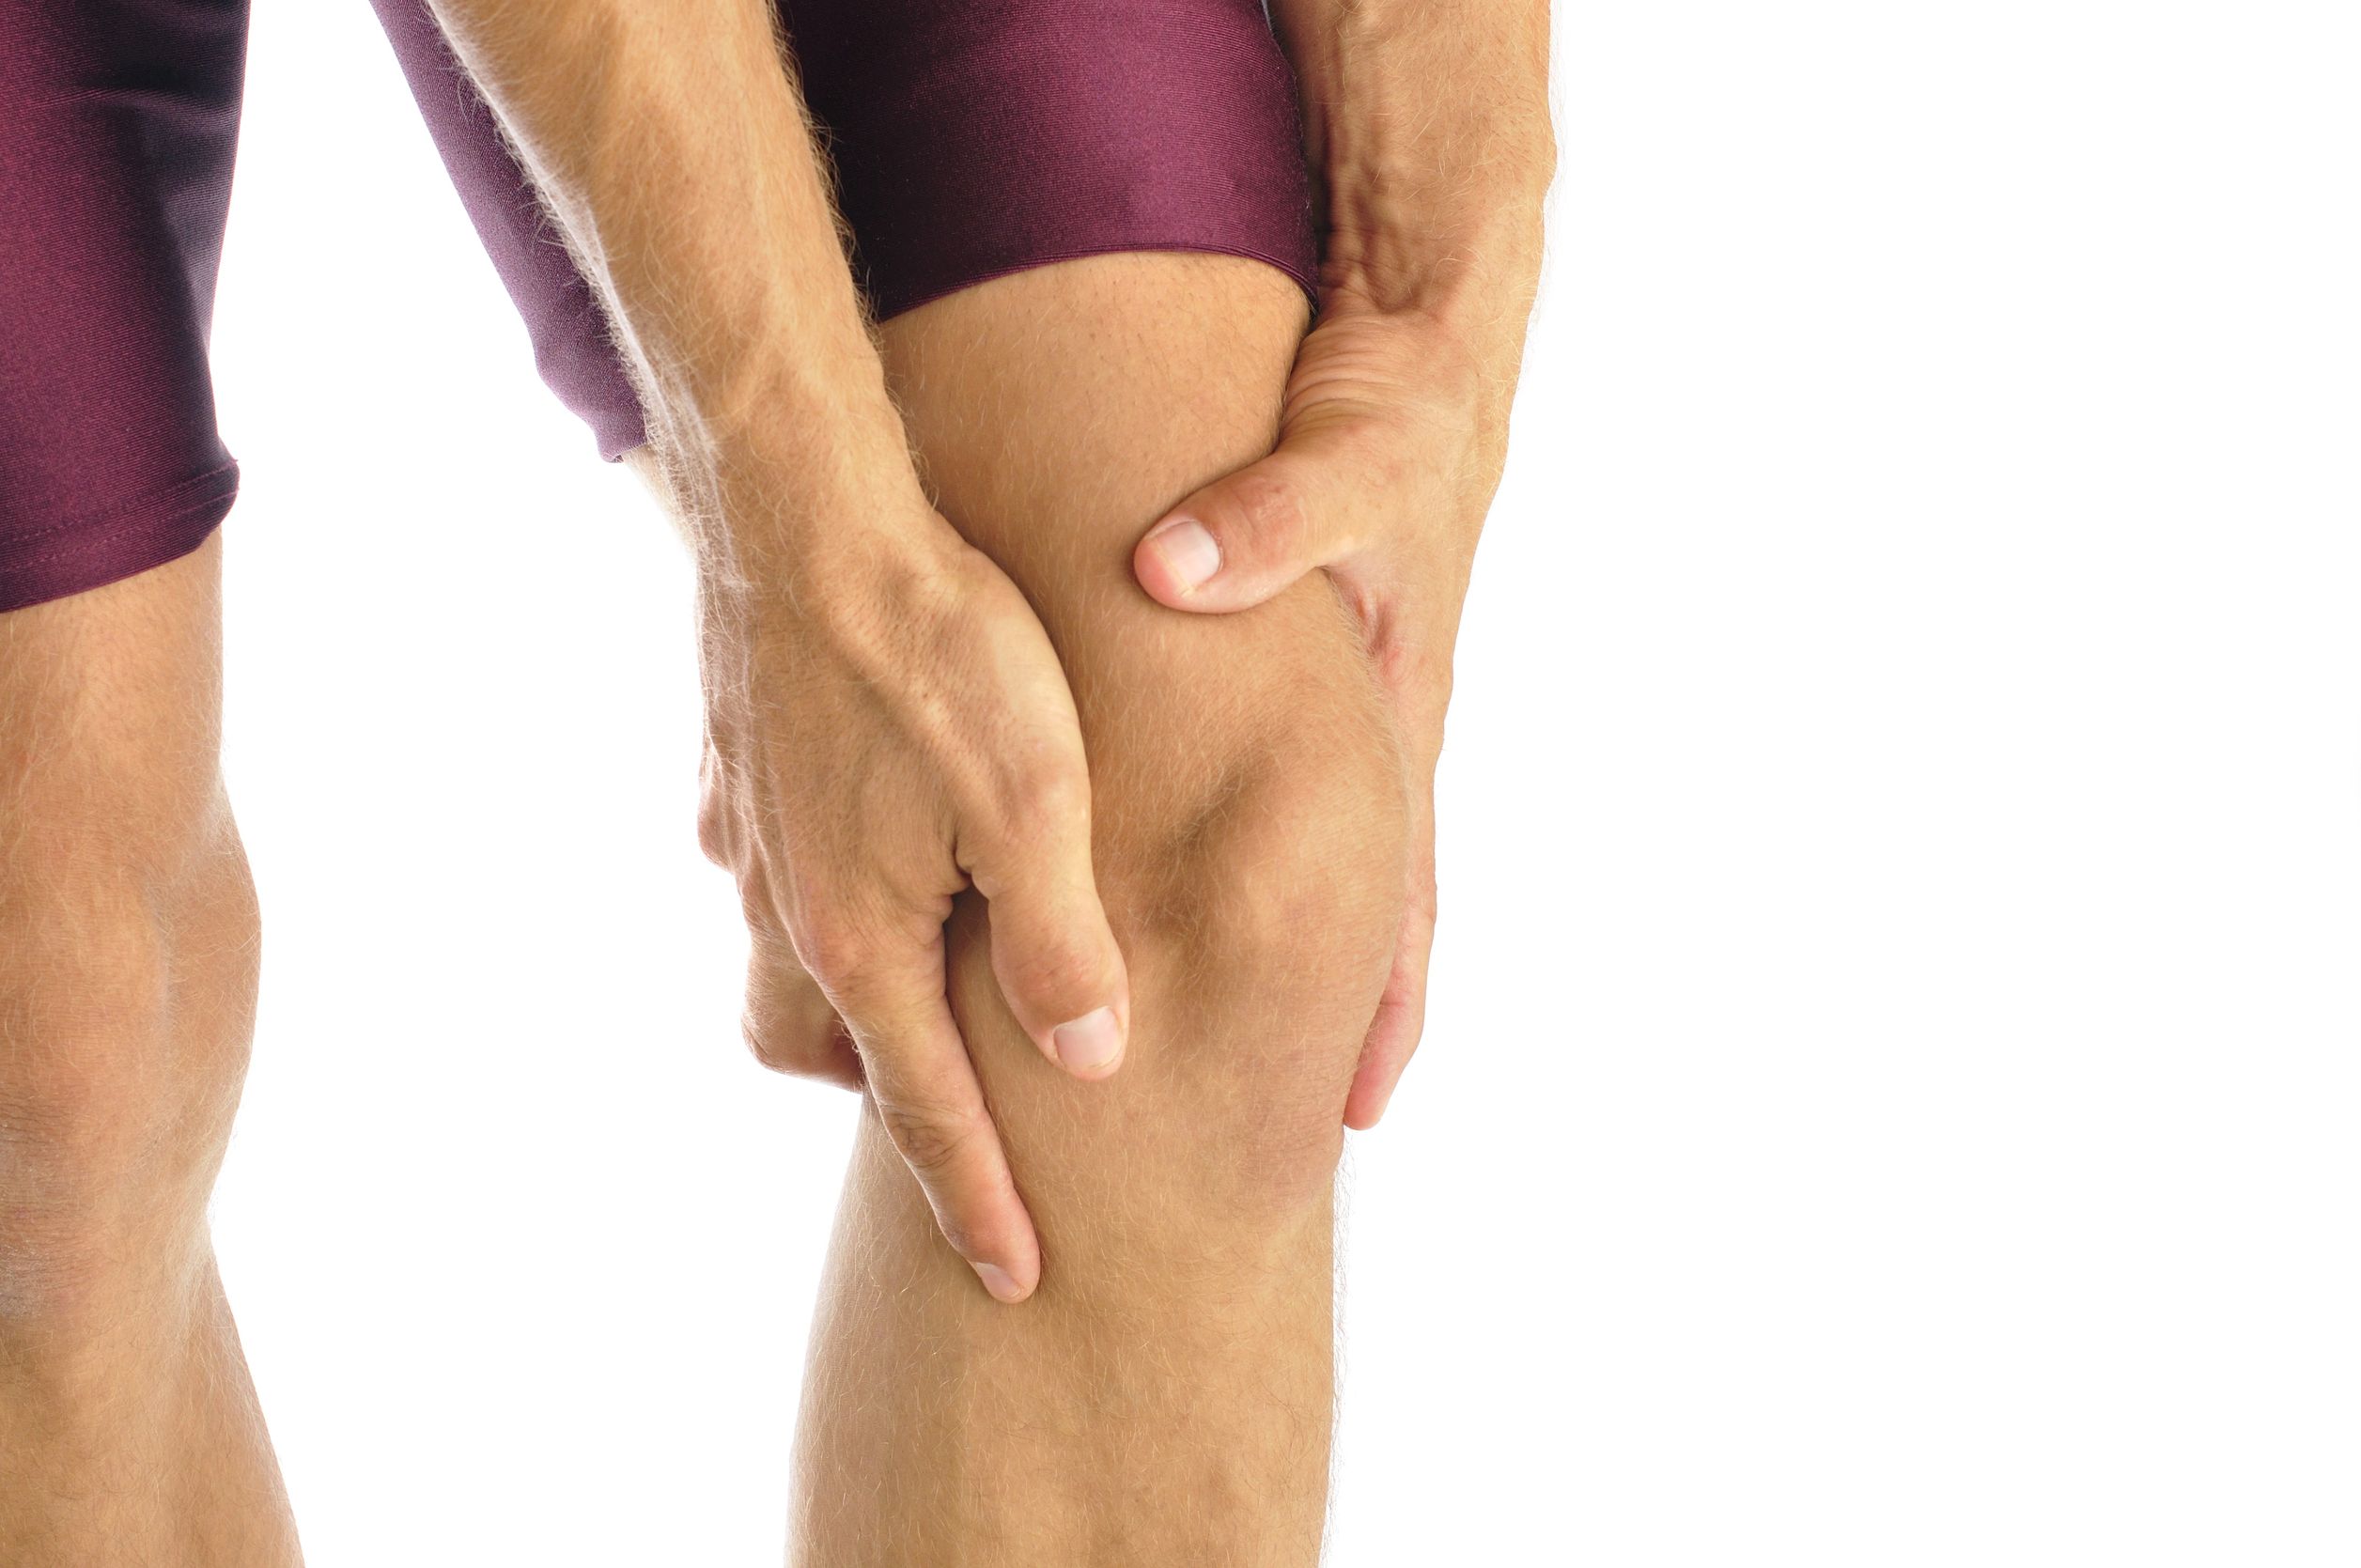 arthritis-may-cause-pain-and-stiffness-in-joints